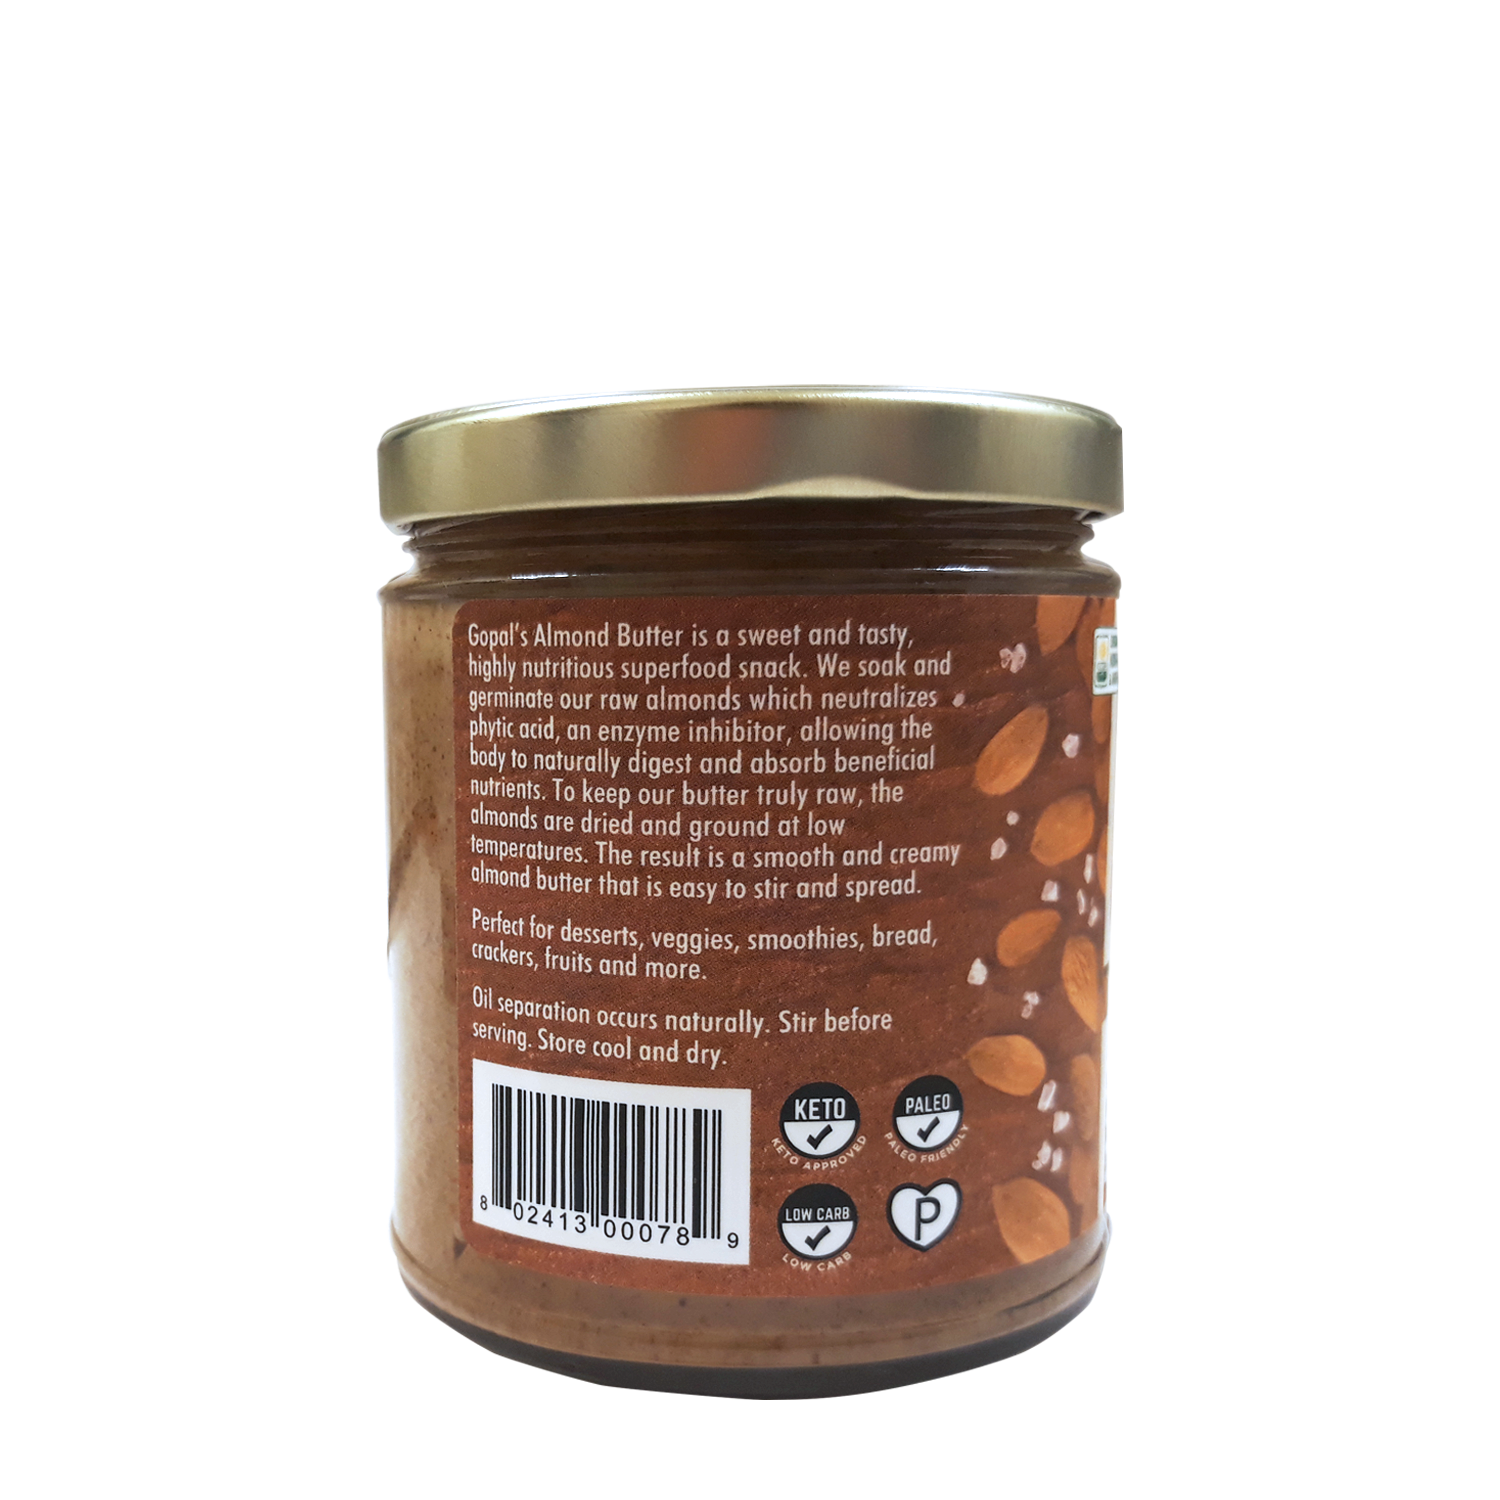 Organic Raw Sprouted Salted Almond Butter 8oz